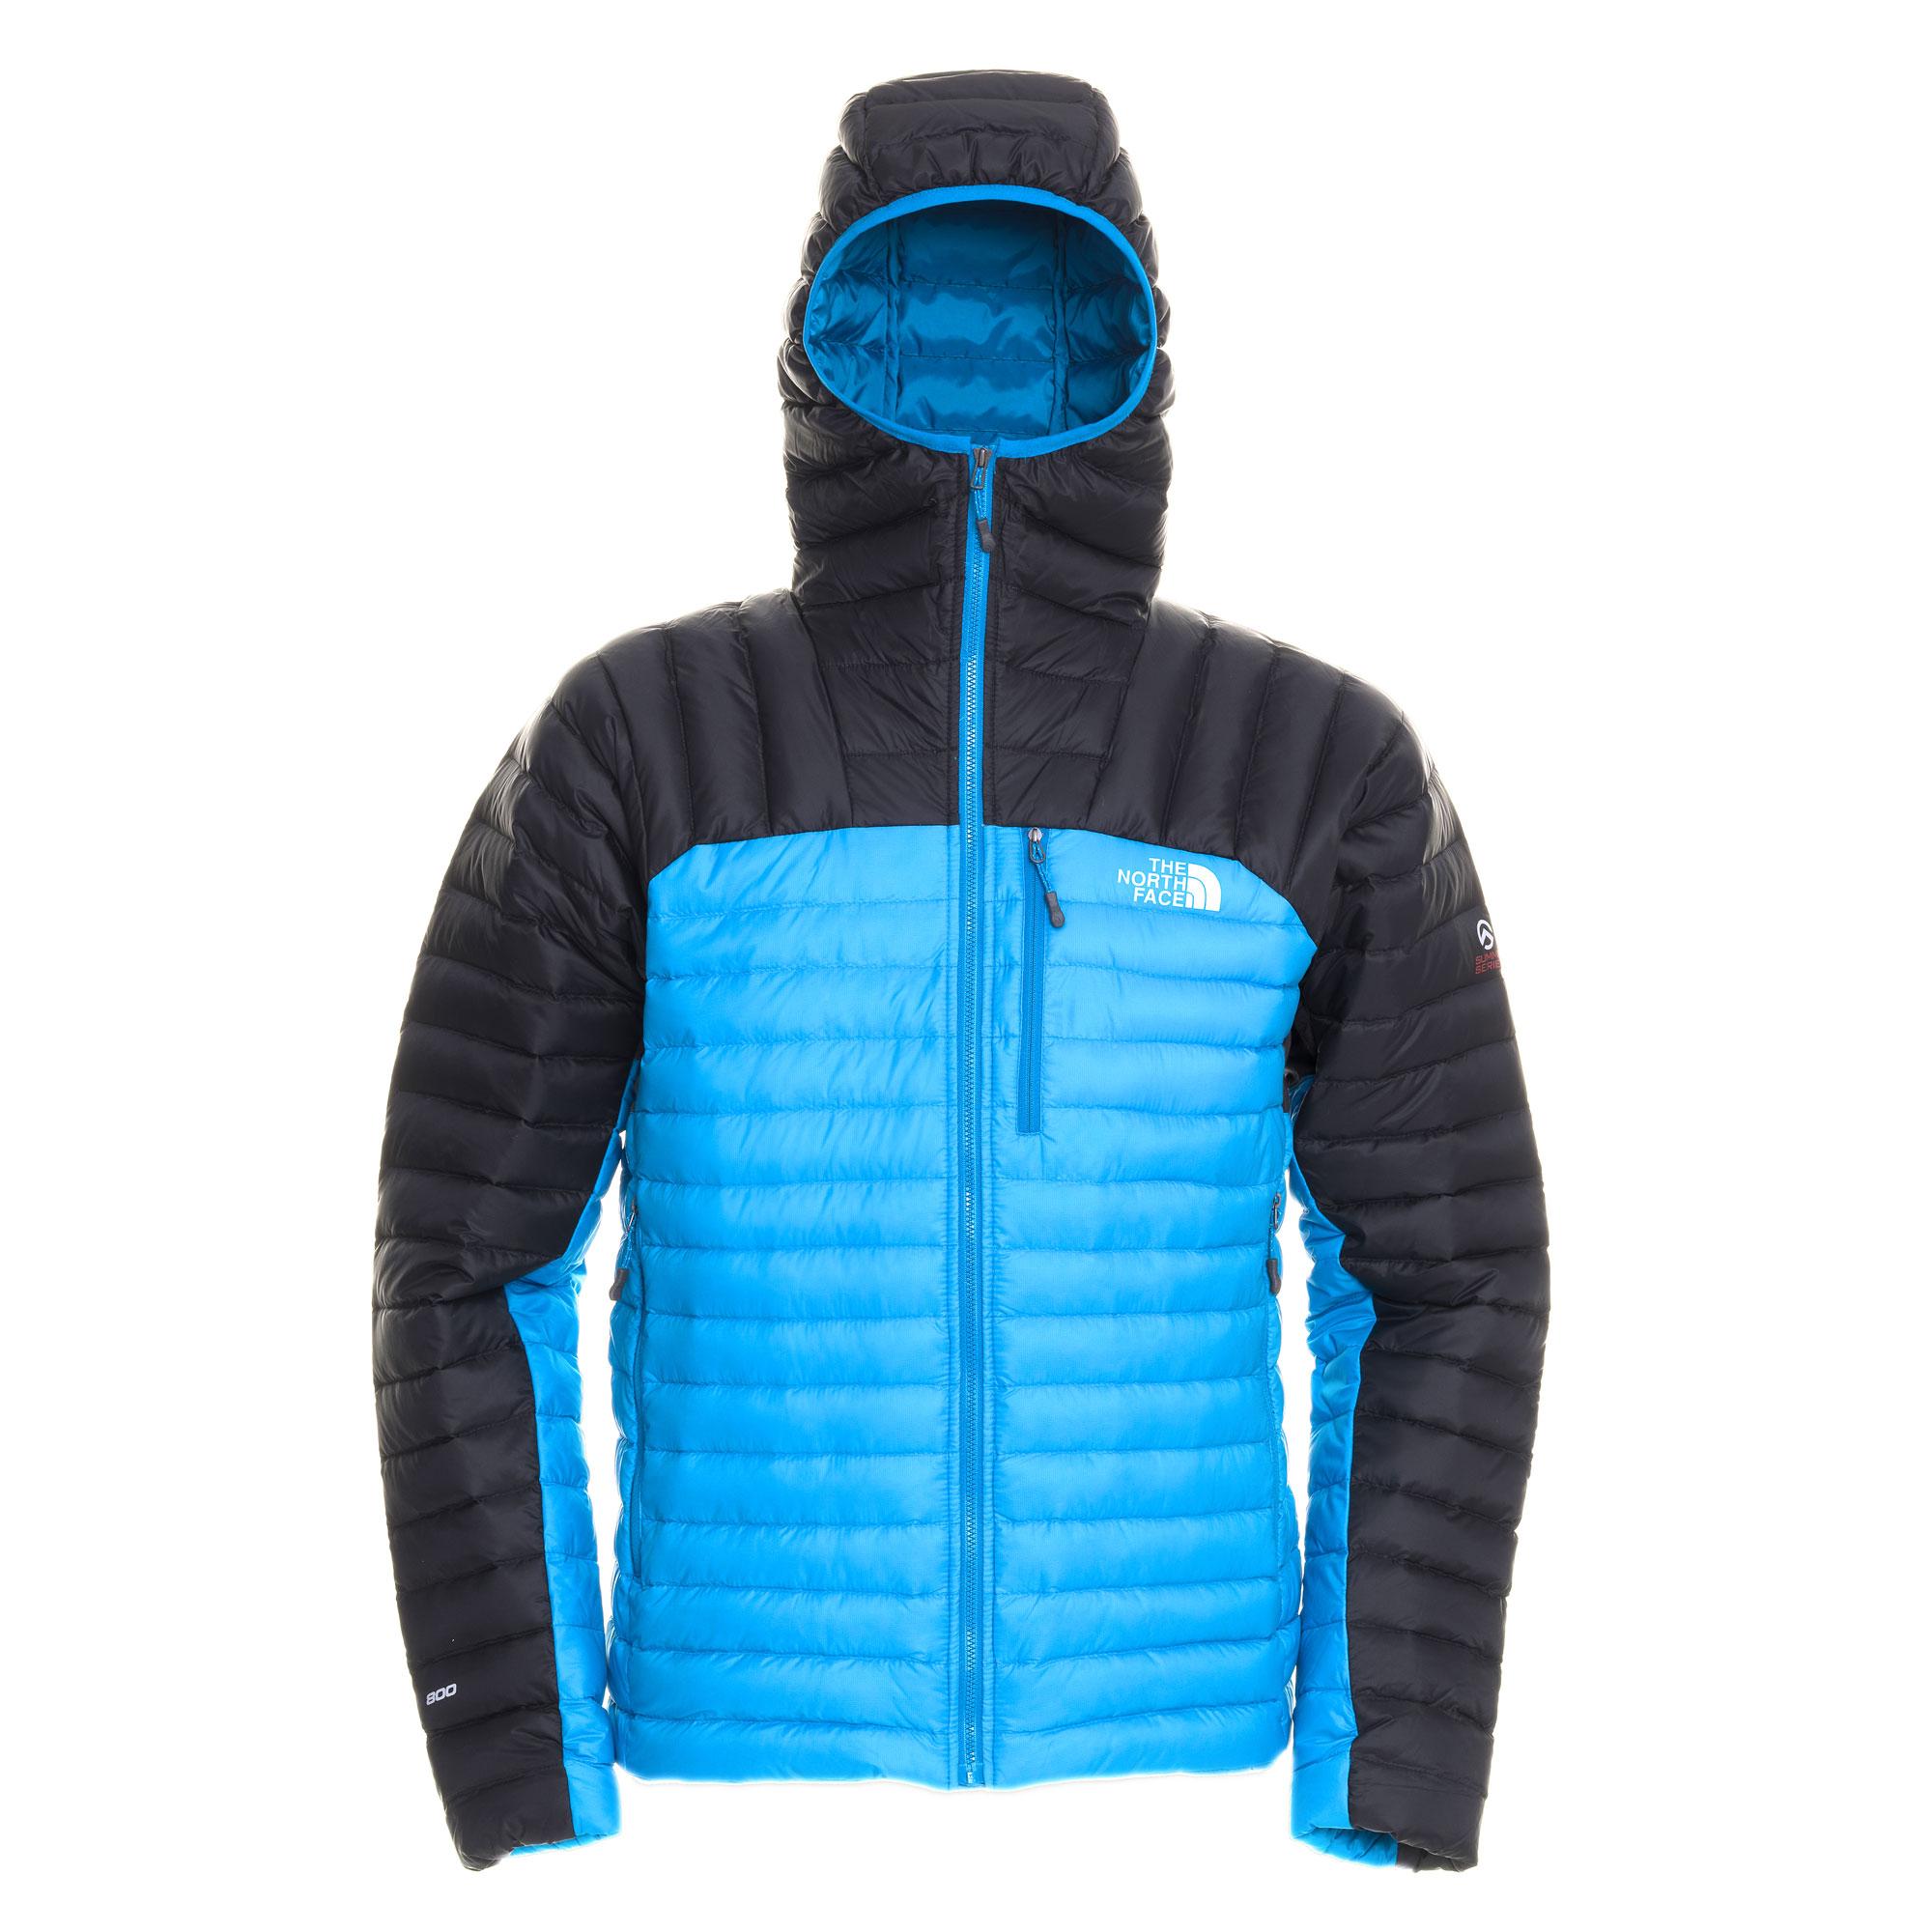 Foto The north face M catalyst micro jacket foto 218378